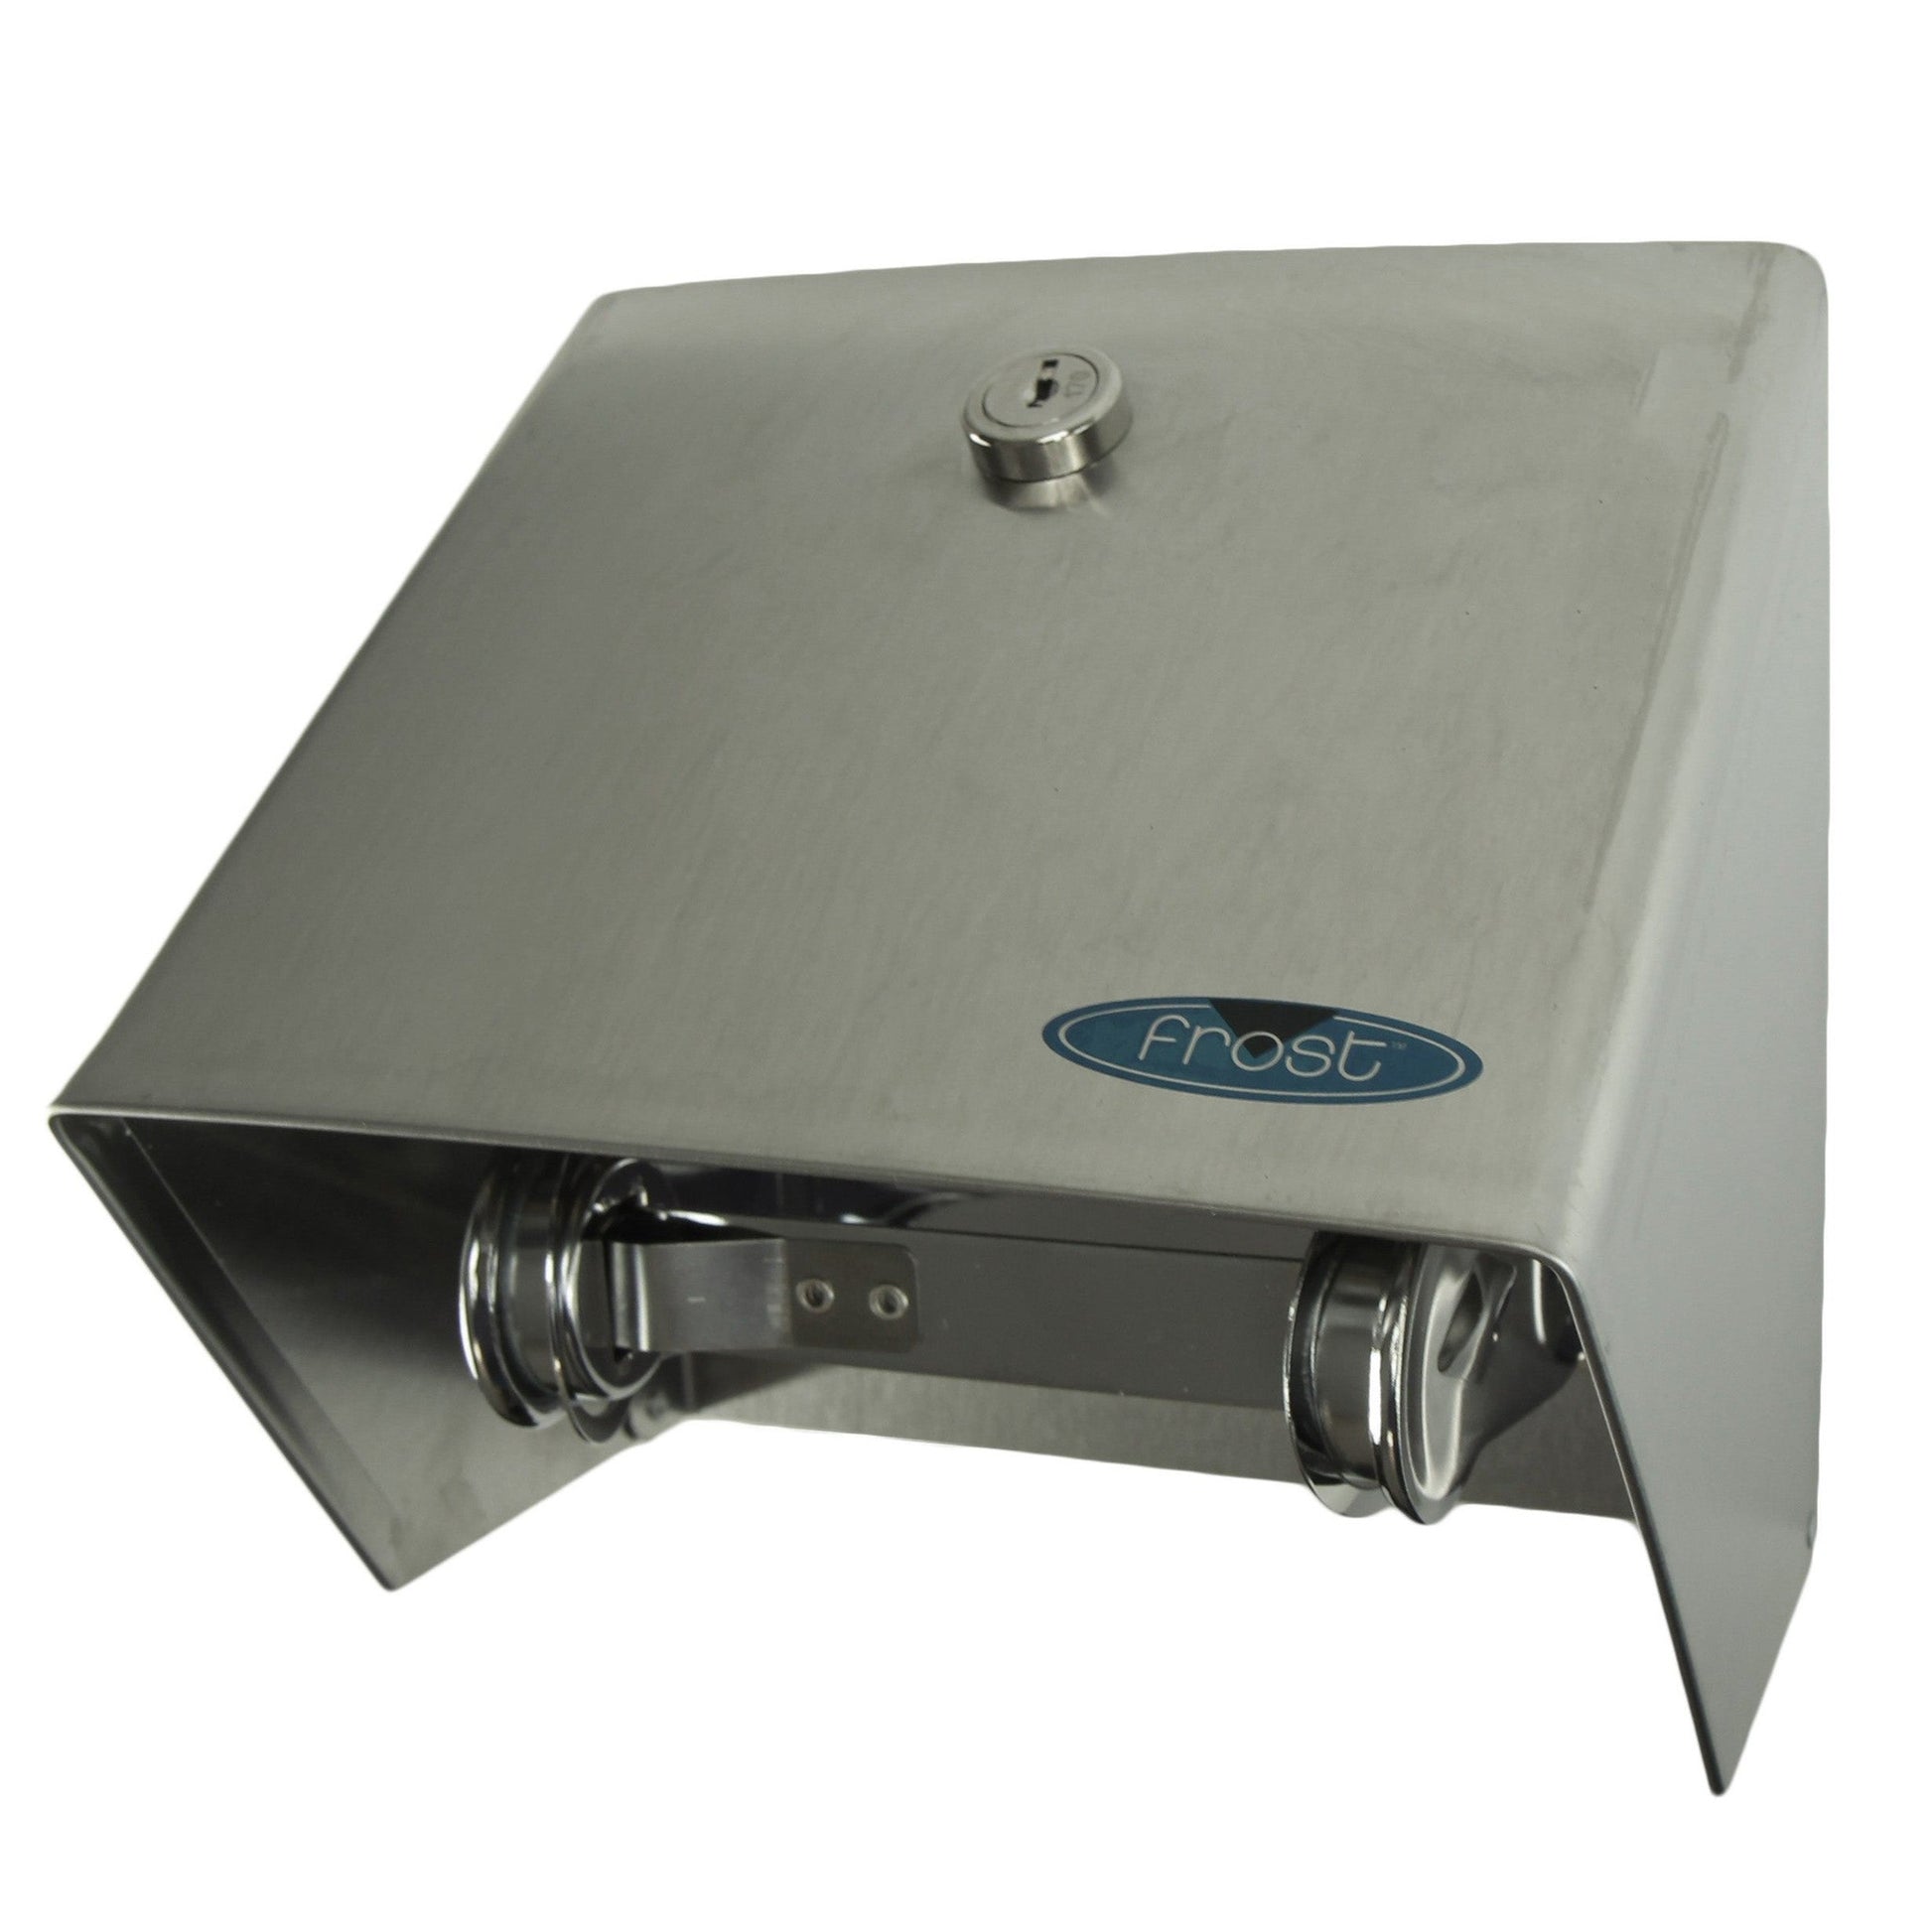 Frost 7.5 x 5.75 x 7.5 Stainless Steel Satin Paper Product Dispenser